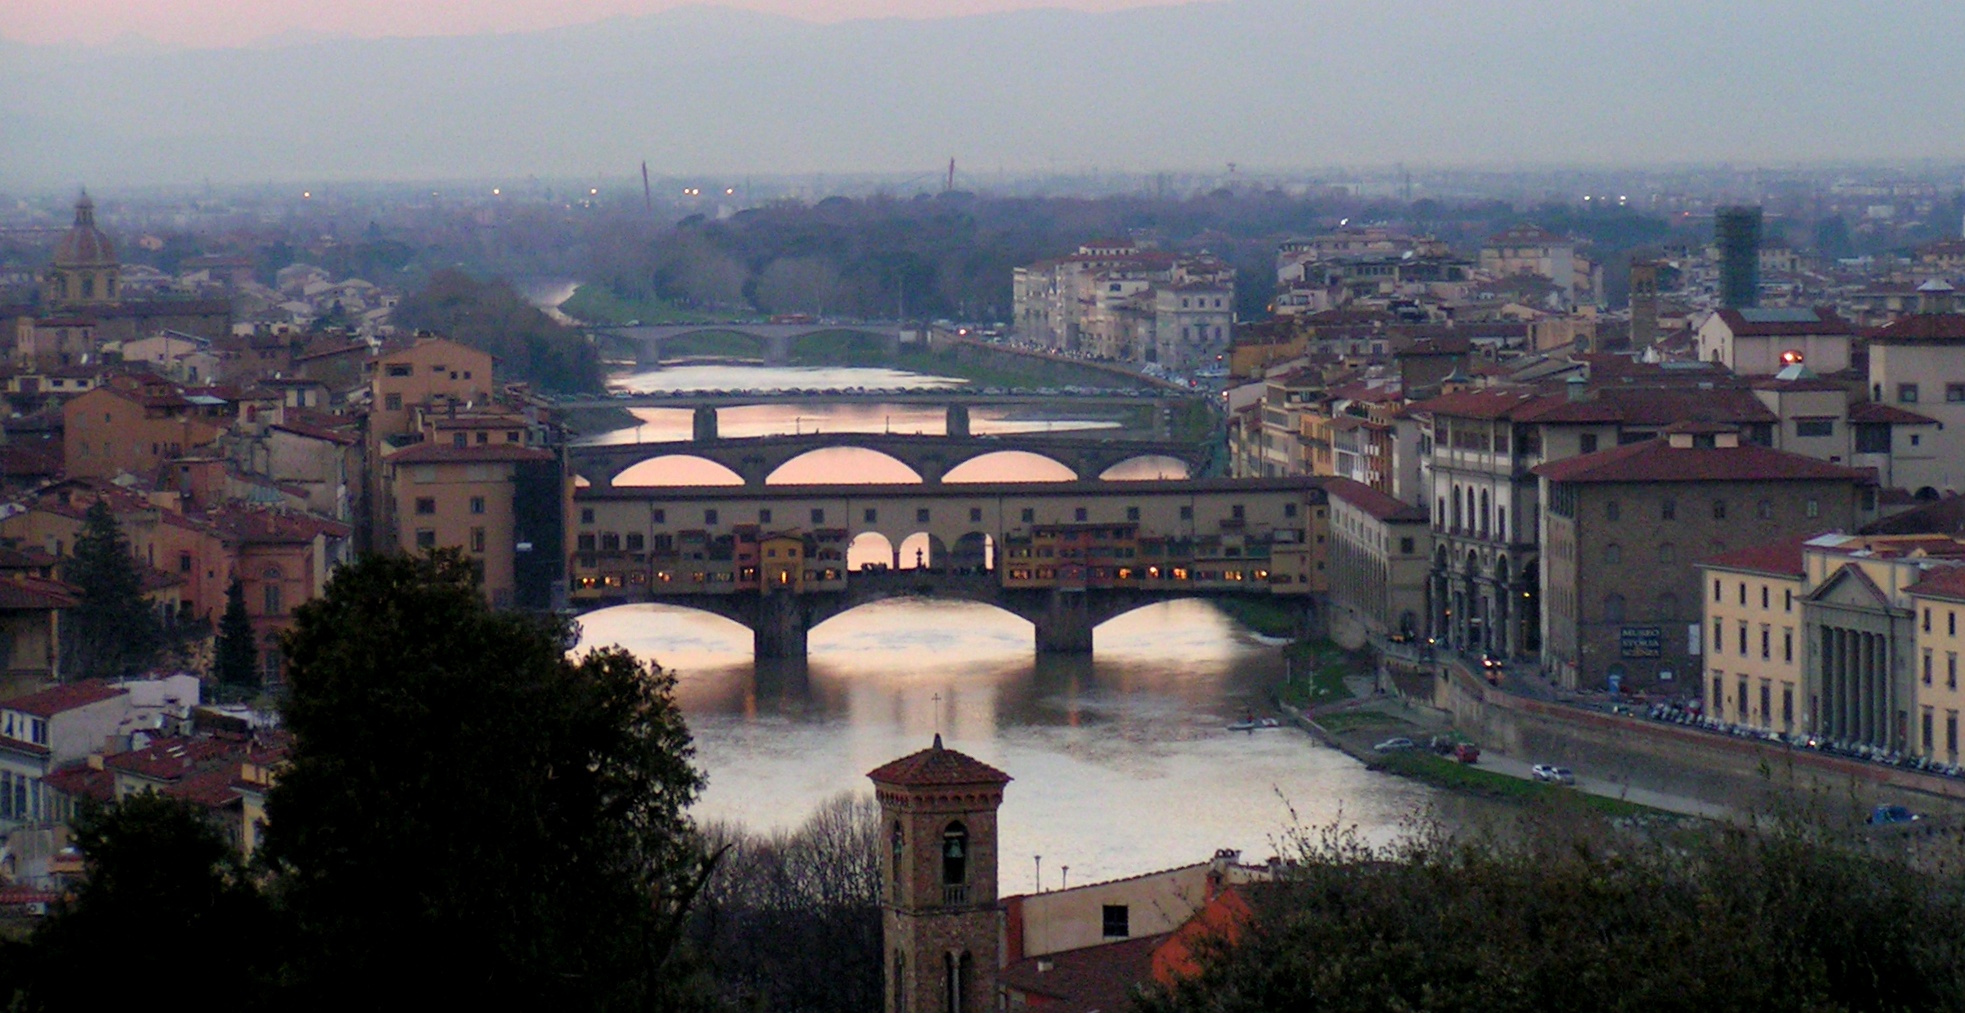 The bridges of Florence at sunset from Piazzale Michelango